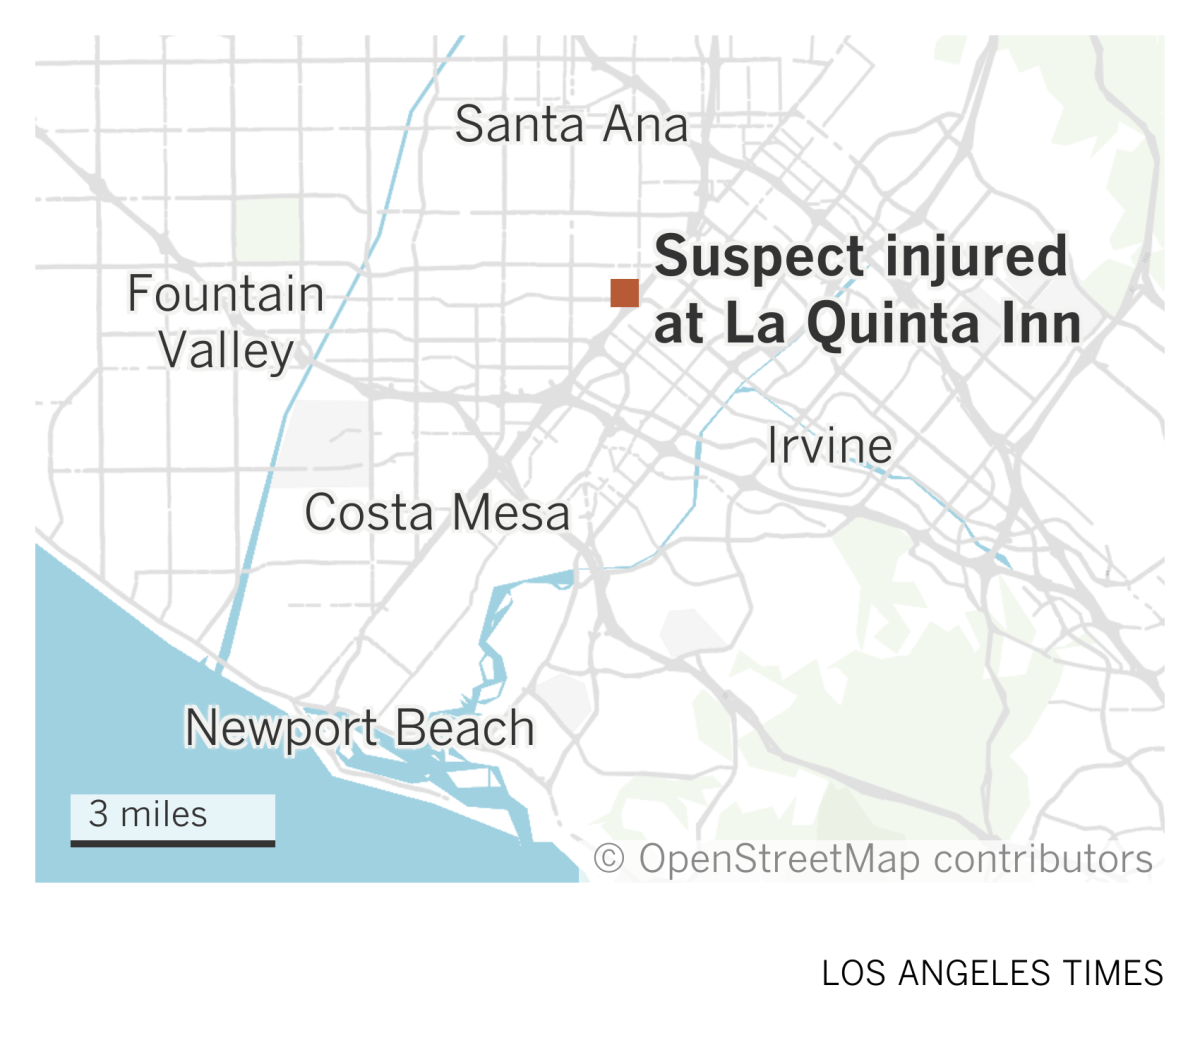 A map of Orange County showing the location of a La Quinta Inn where a suspect was injured